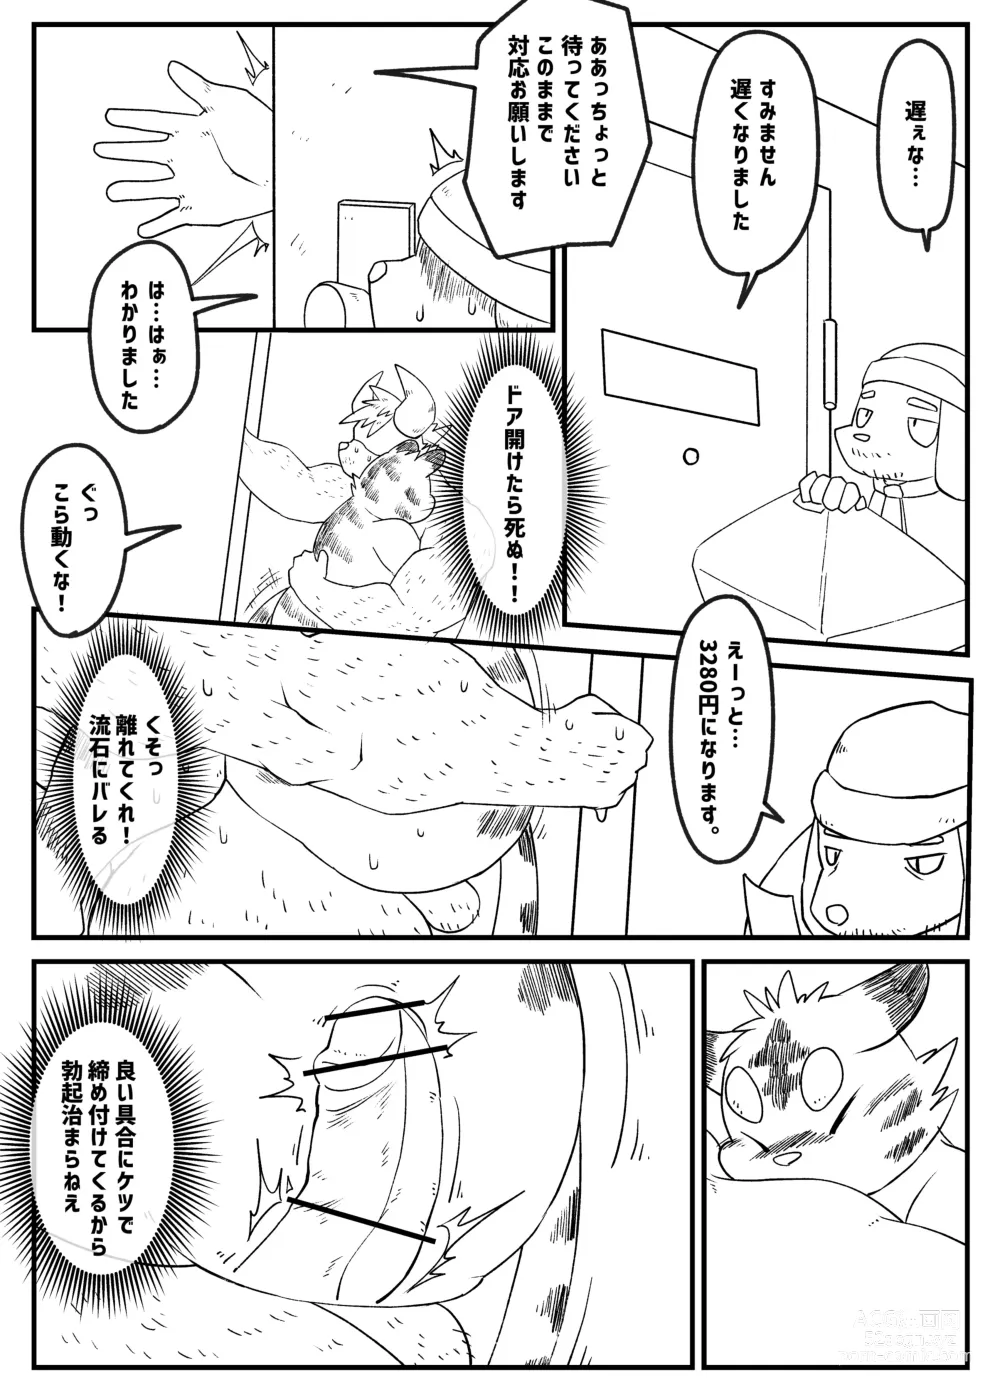 Page 8 of doujinshi Muscular Bull Teacher & Chubby Tiger Student 5